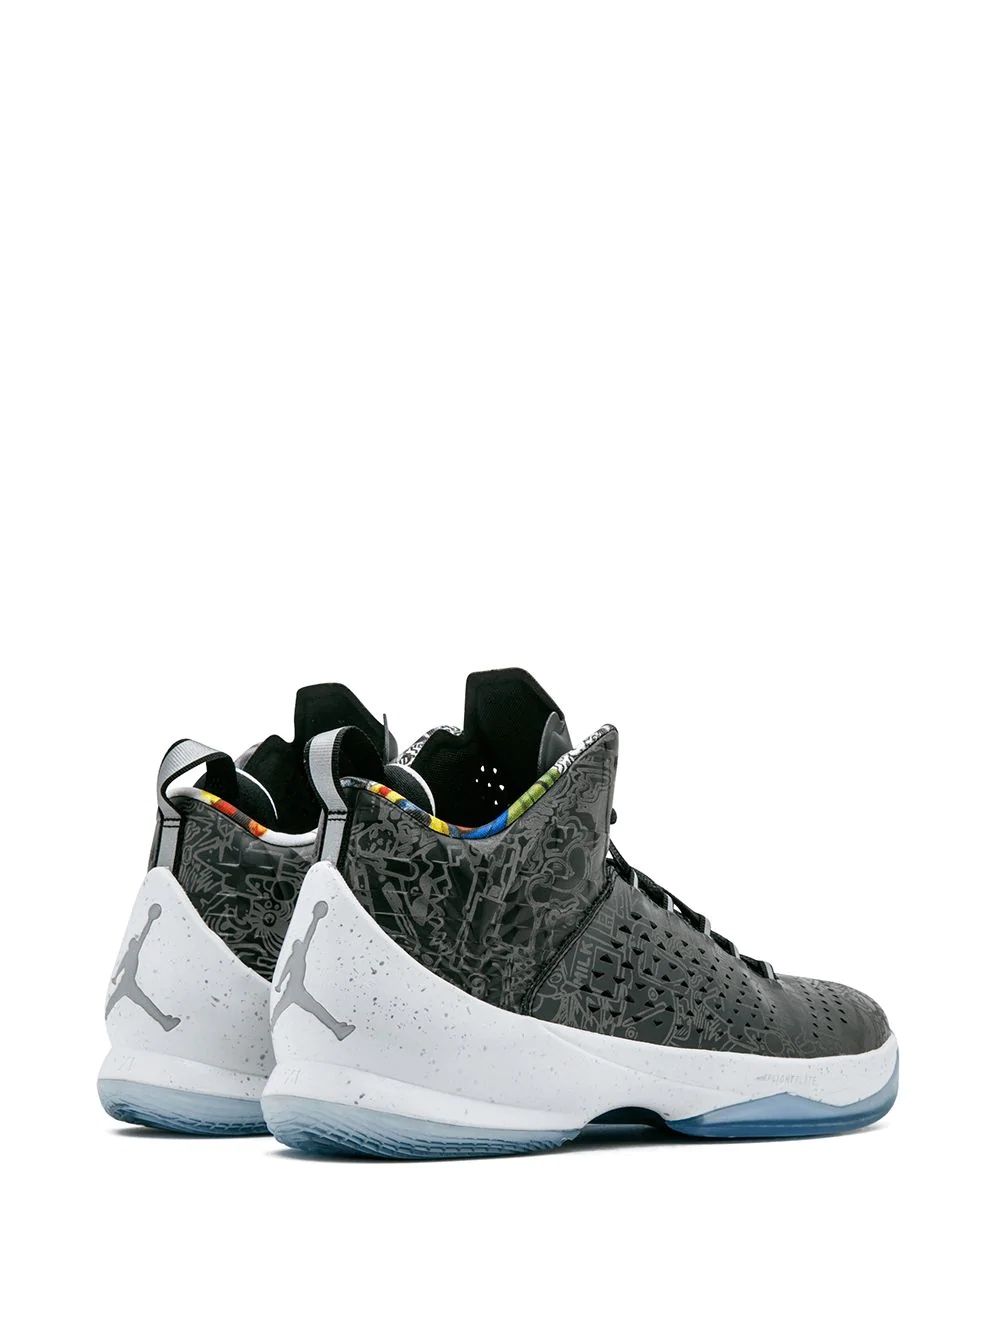 Melo M11 sneakers - 3